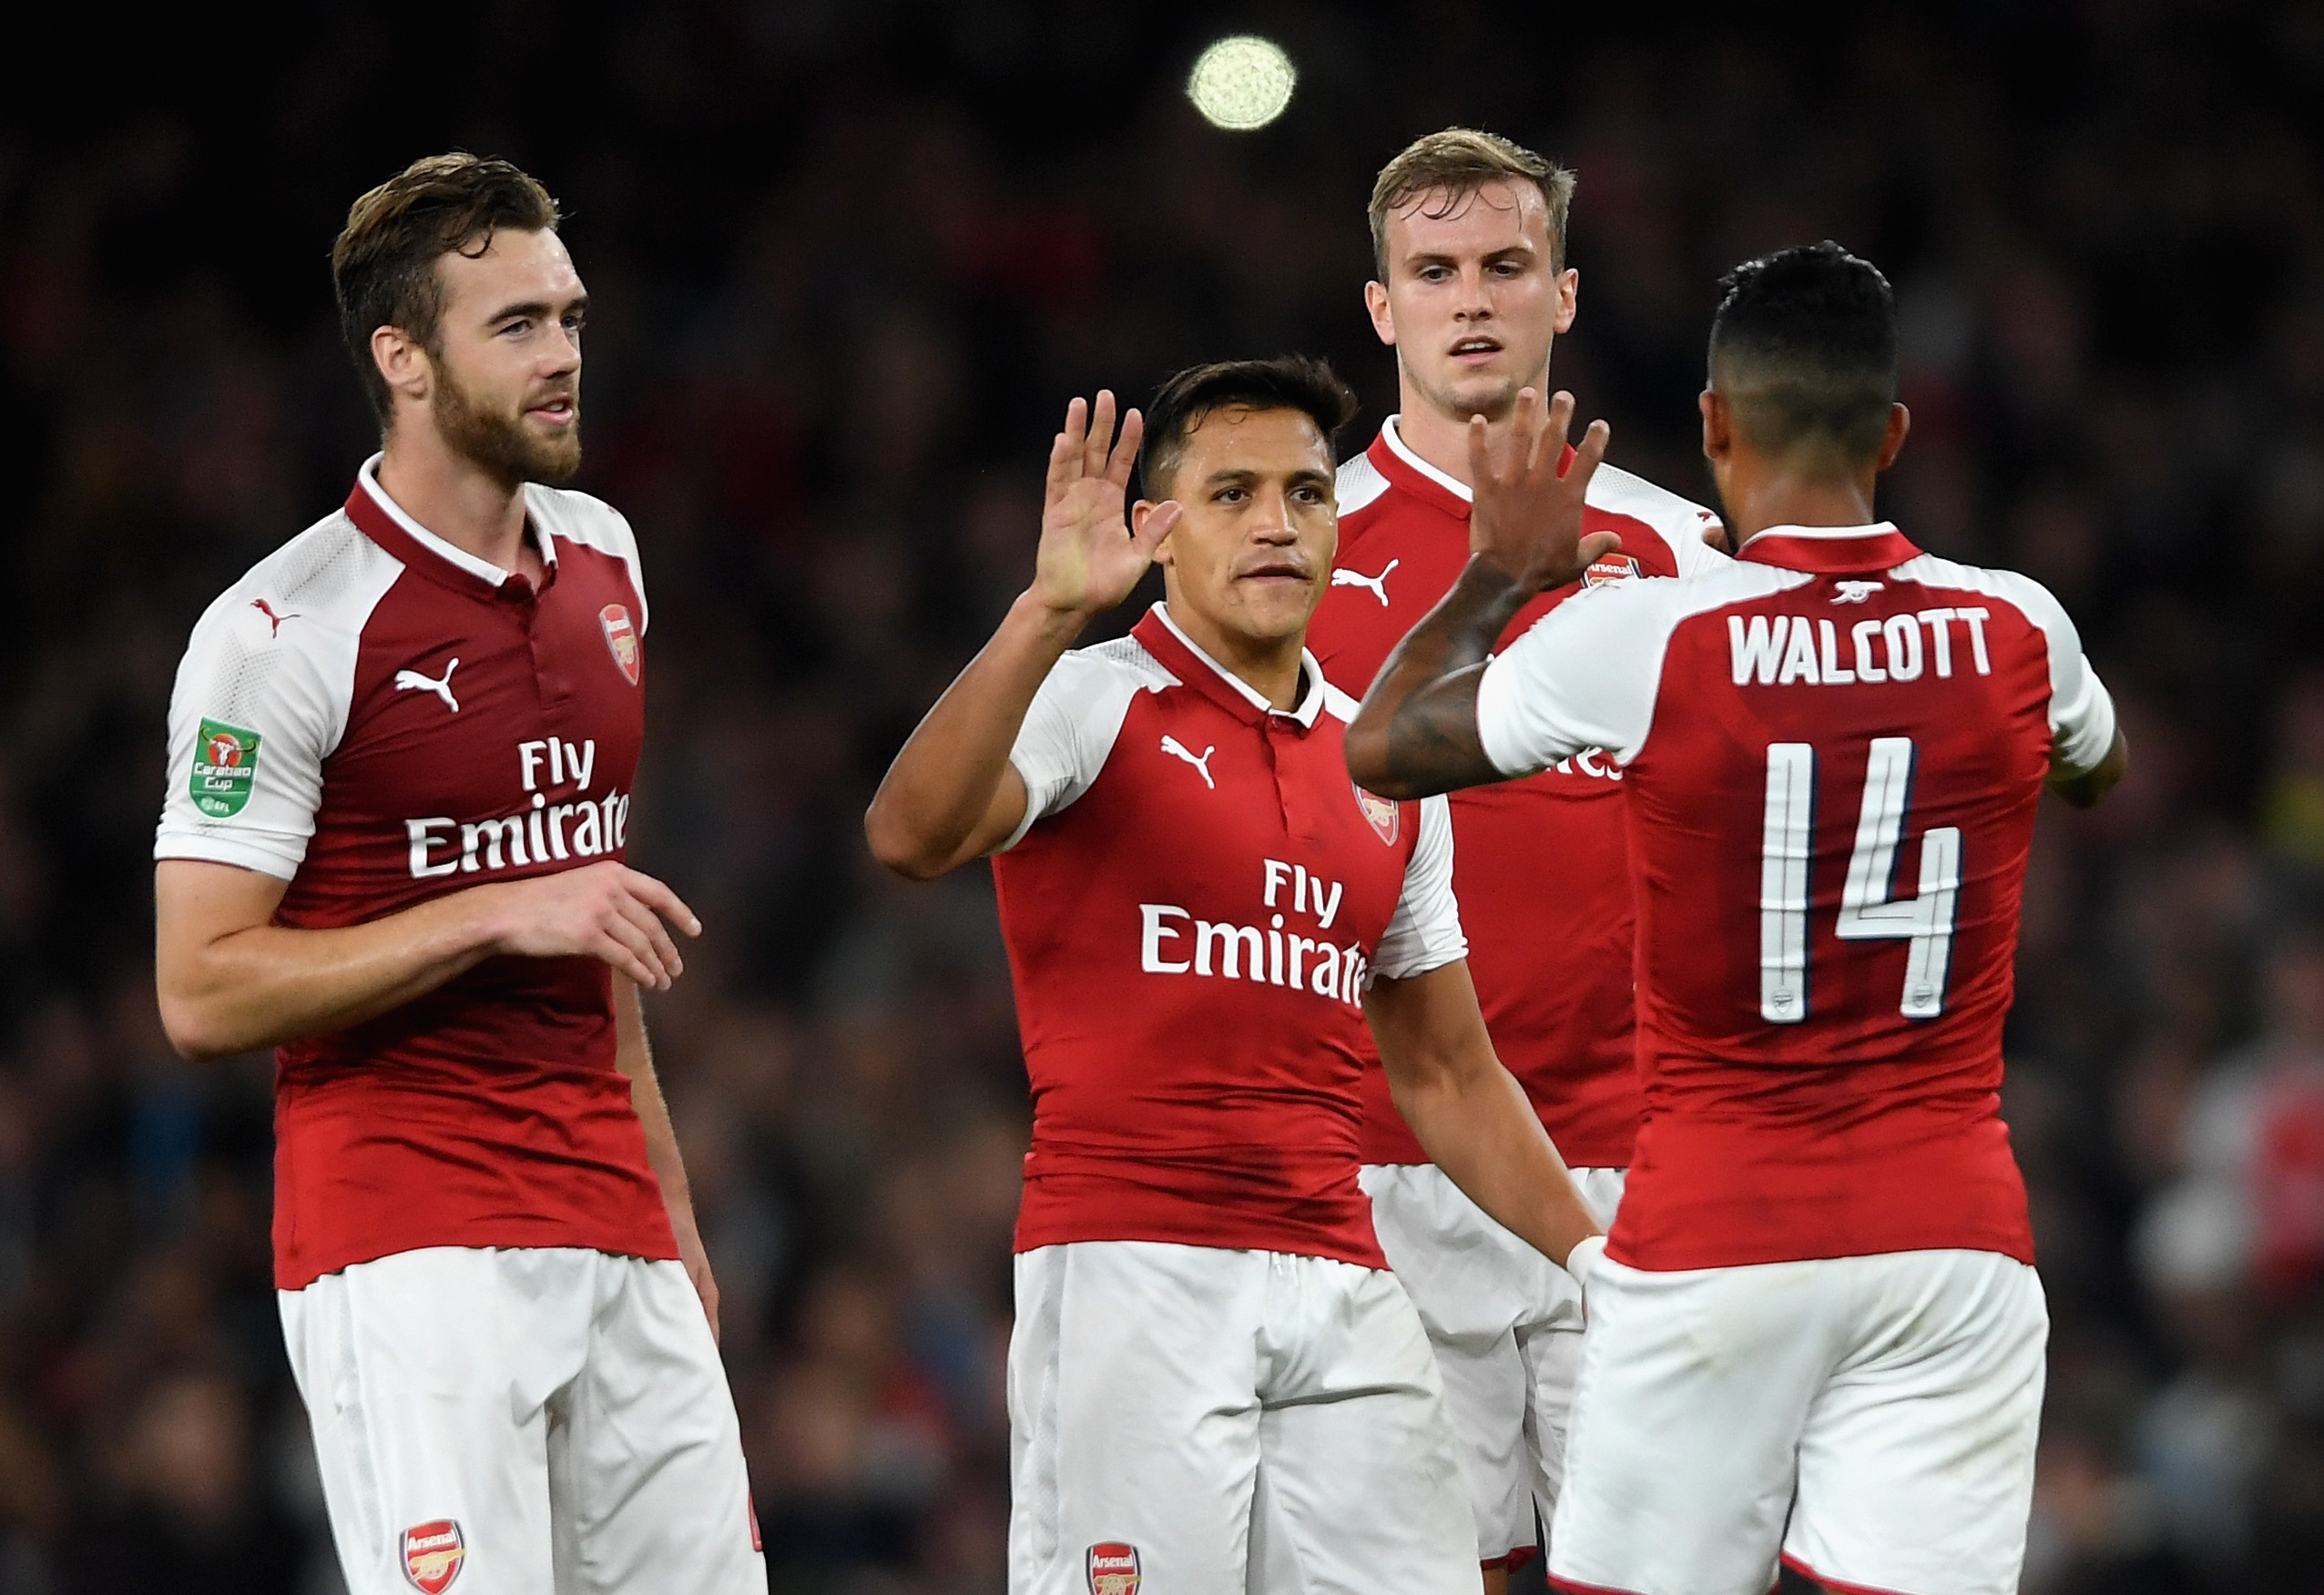 LONDON, ENGLAND - SEPTEMBER 20: Theo Walcott of Arsenal celebrates scoring his sides first goal with his Arsenal team mates during the Carabao Cup Third Round match between Arsenal and Doncaster Rovers at Emirates Stadium on September 20, 2017 in London, England.  (Photo by Mike Hewitt/Getty Images)